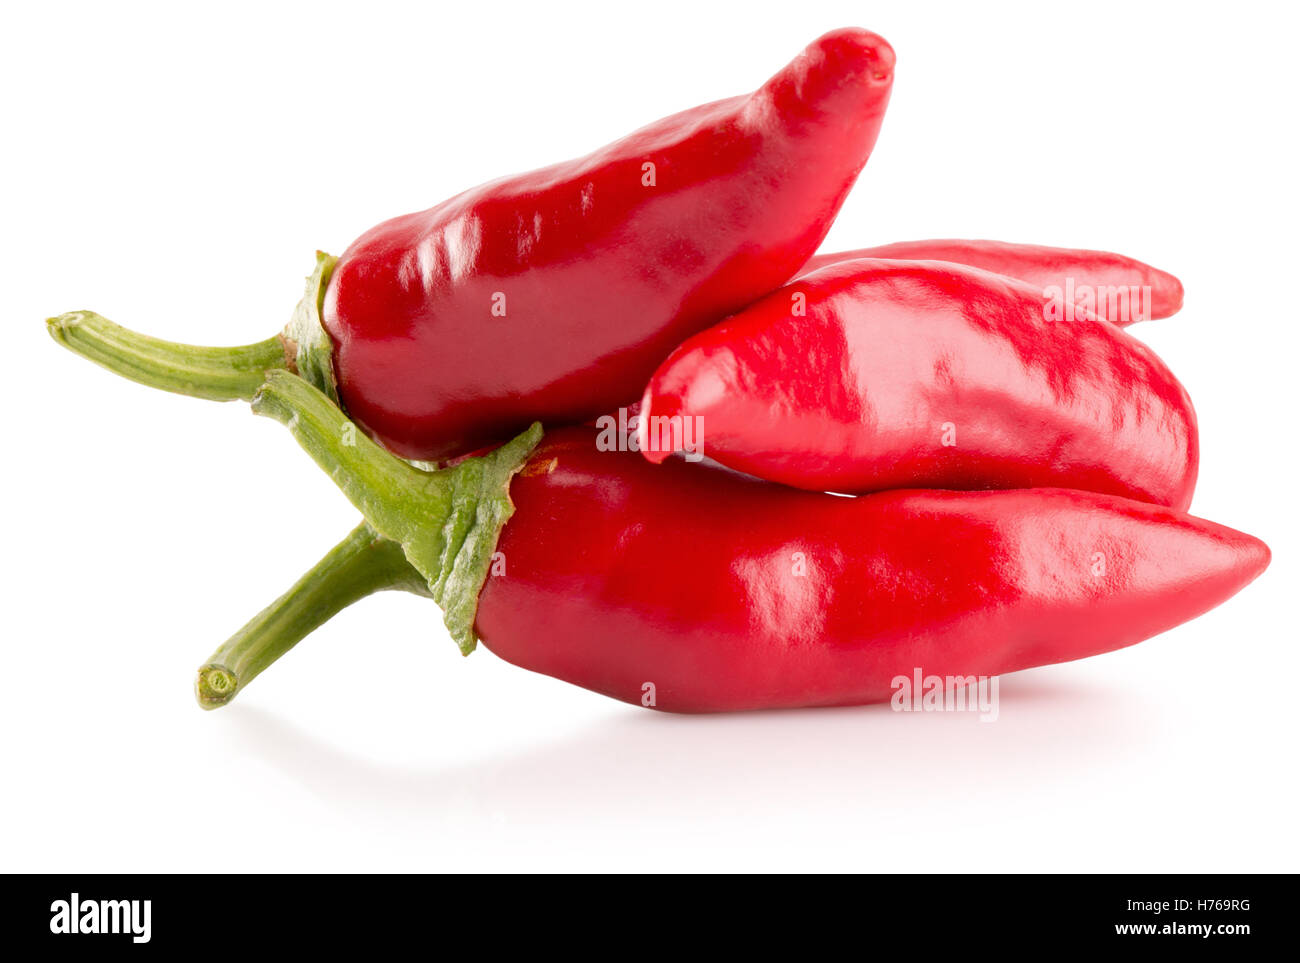 red chili peppers isolated on the white background. Stock Photo